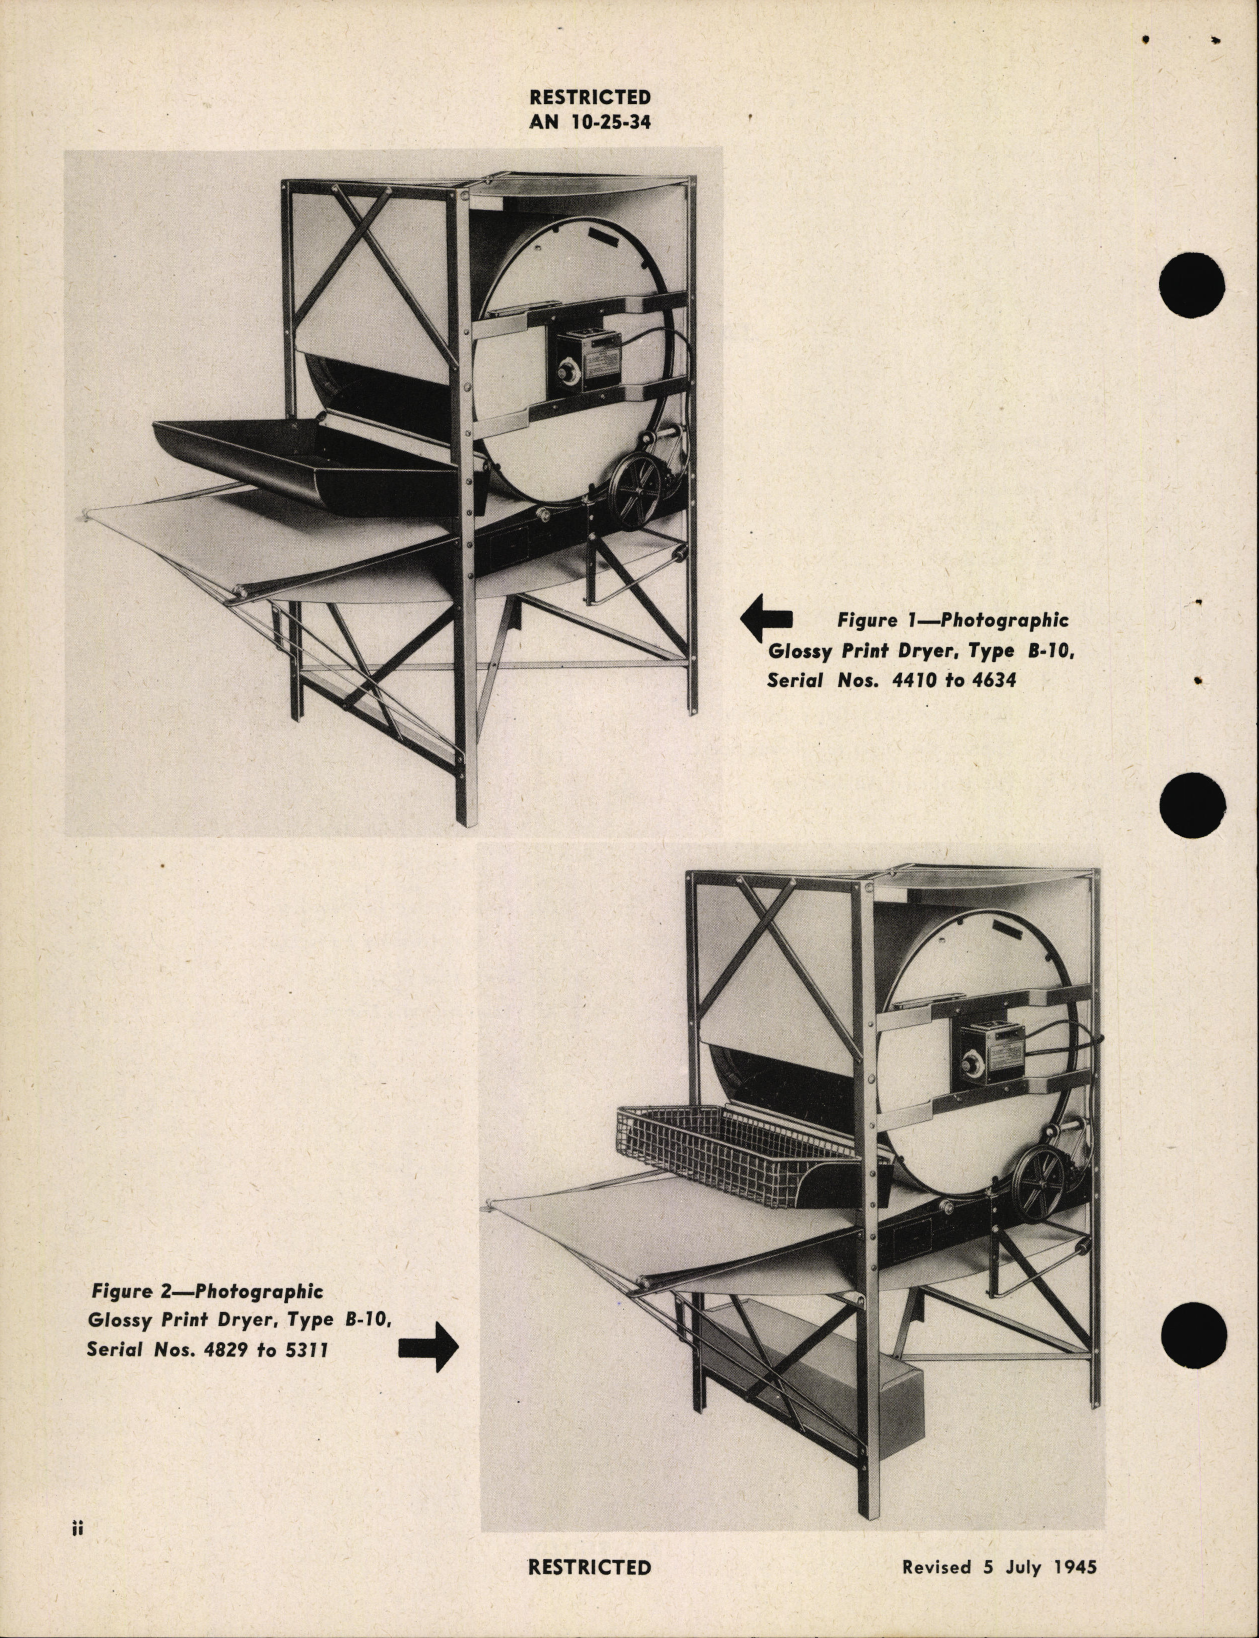 Sample page 6 from AirCorps Library document: Operation, Service, & Overhaul Instructions with Parts Catalog for Type B-10 Photographic Glossy Print Dryer